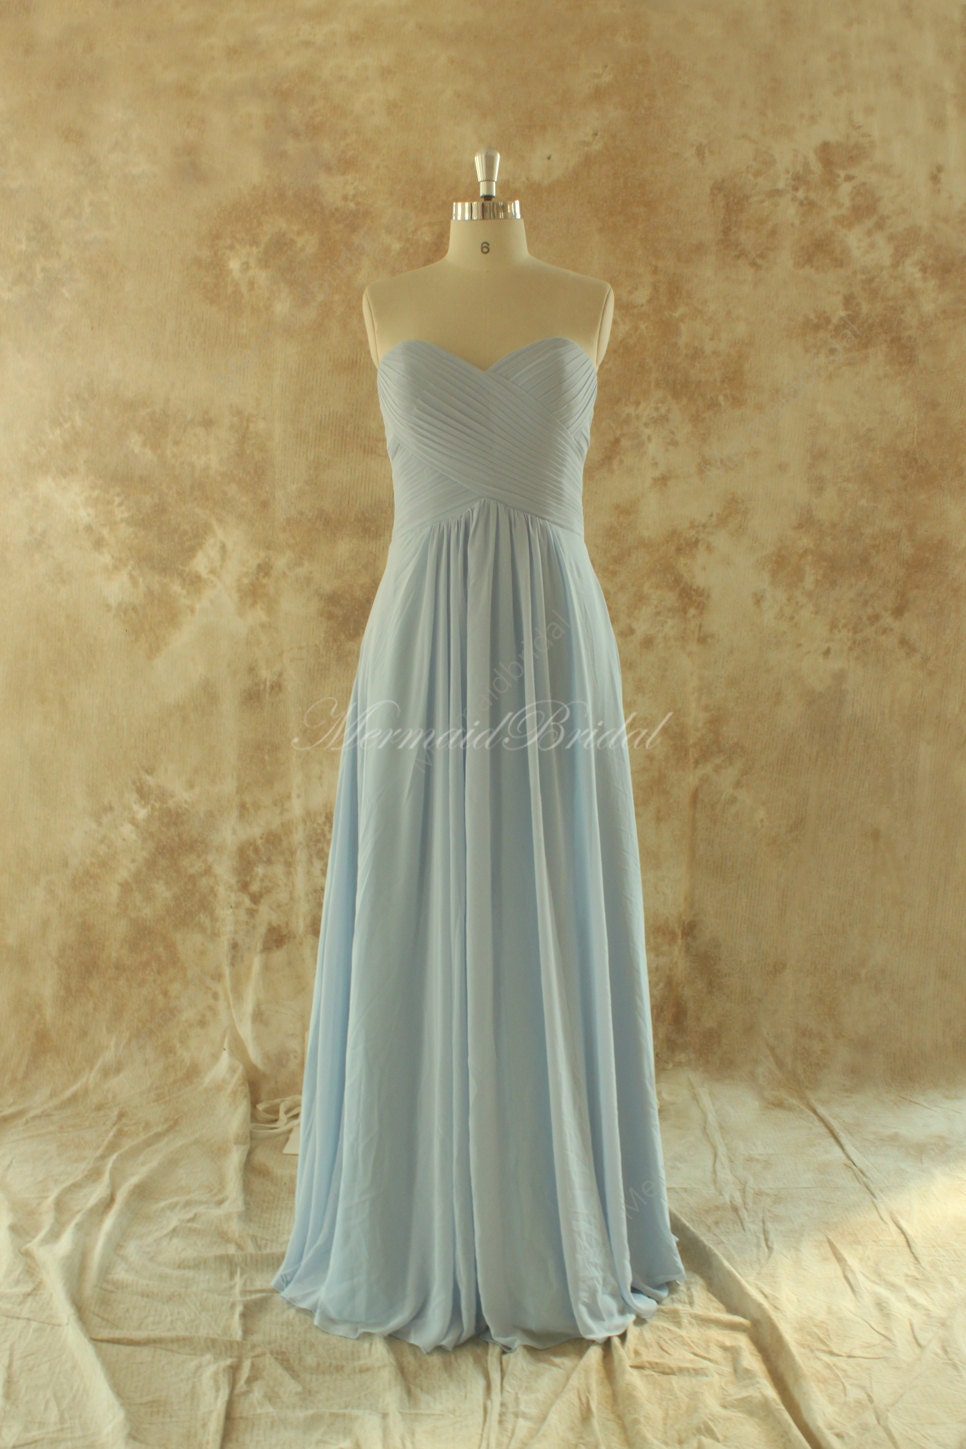 Simple light sky blue bridesmaid dress prom gownhomecoming | Etsy